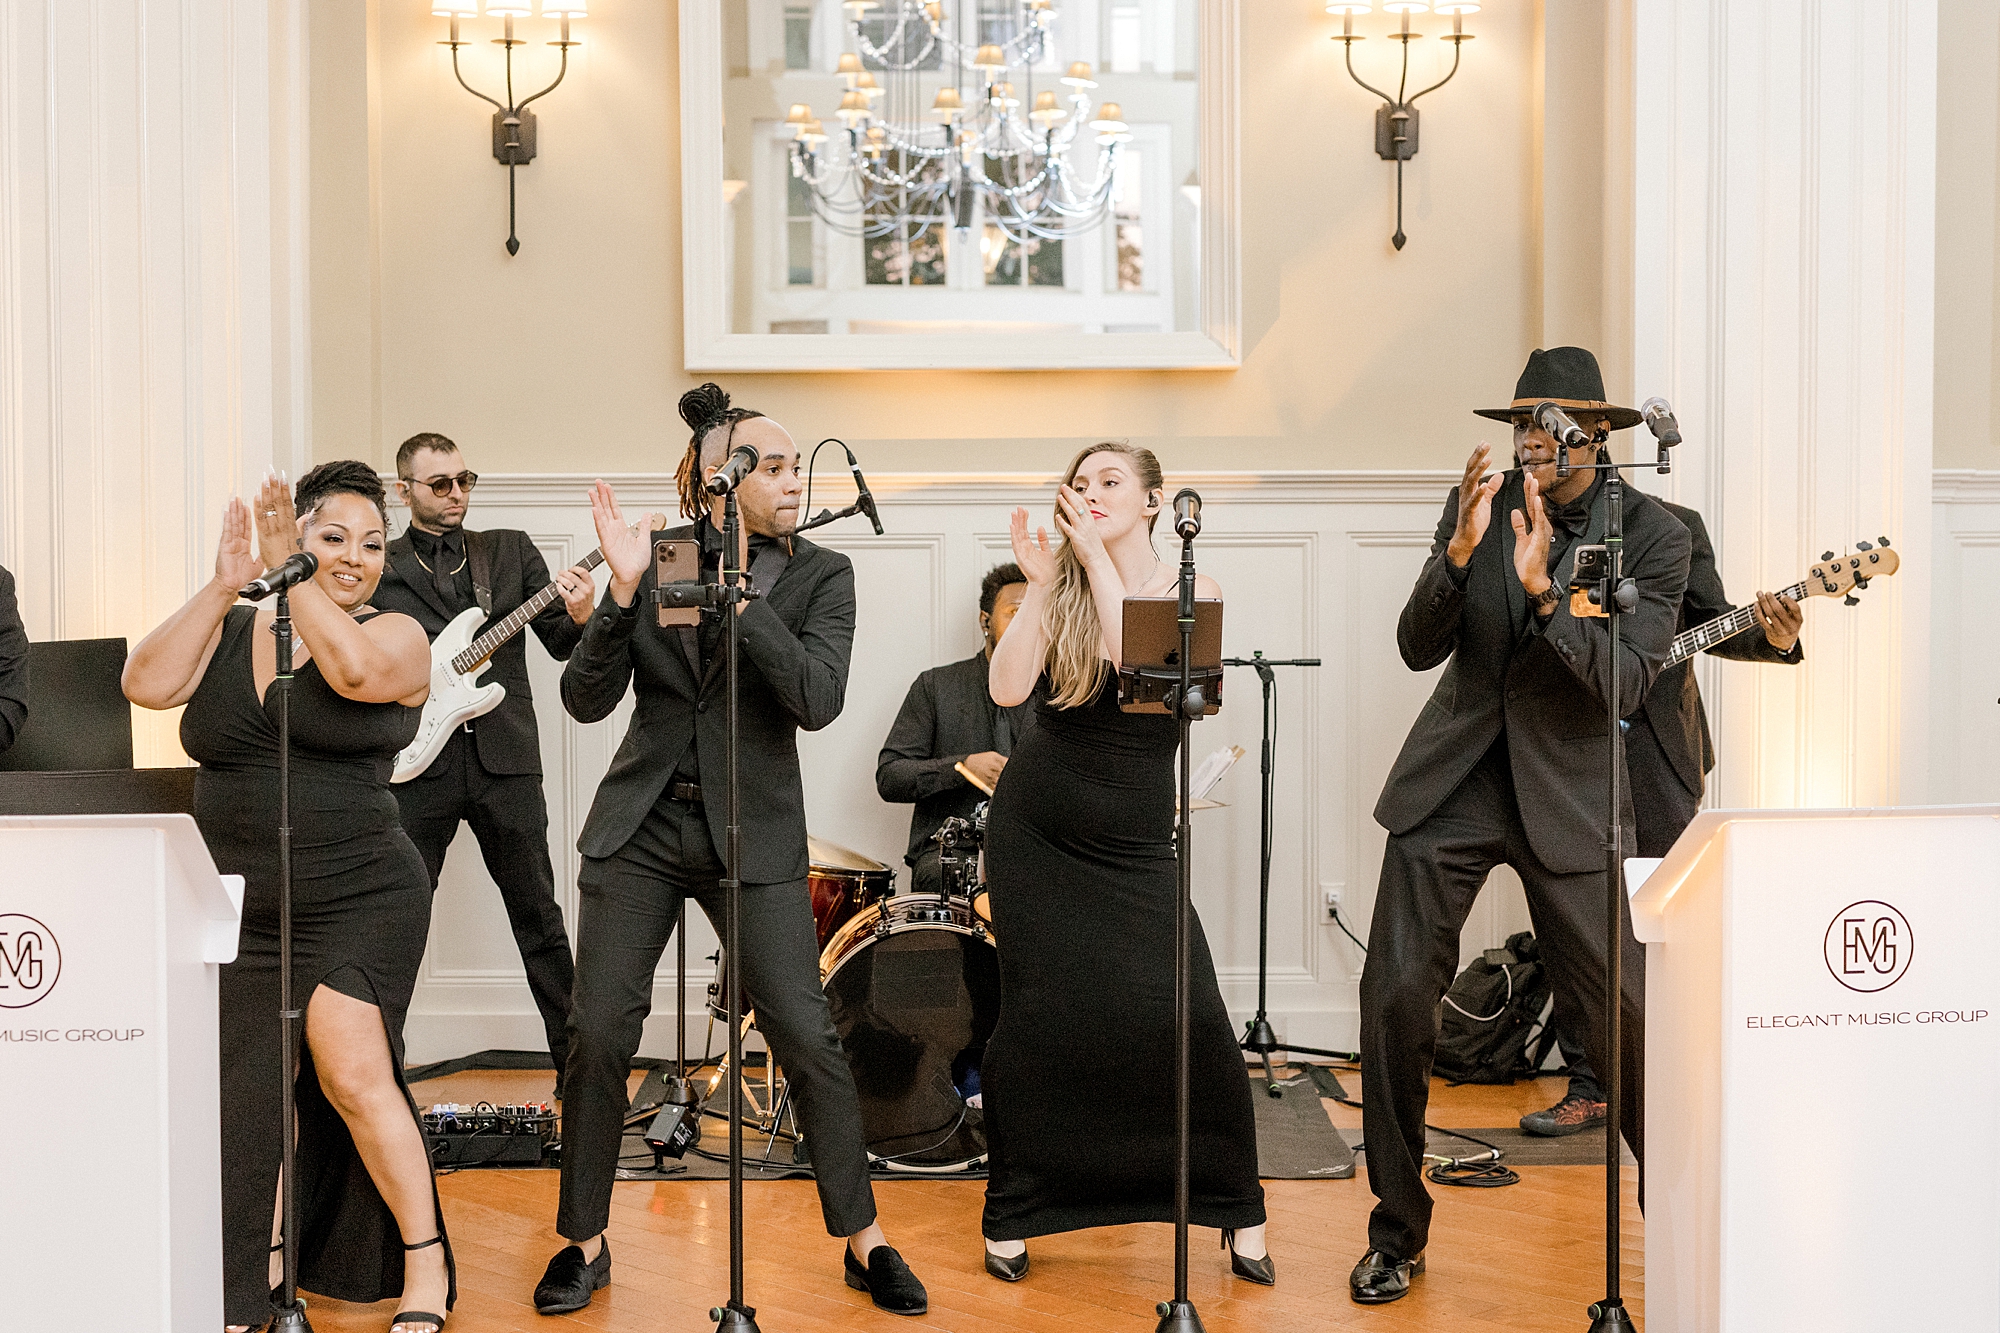 live band performs during NJ wedding reception at Ryland Inn